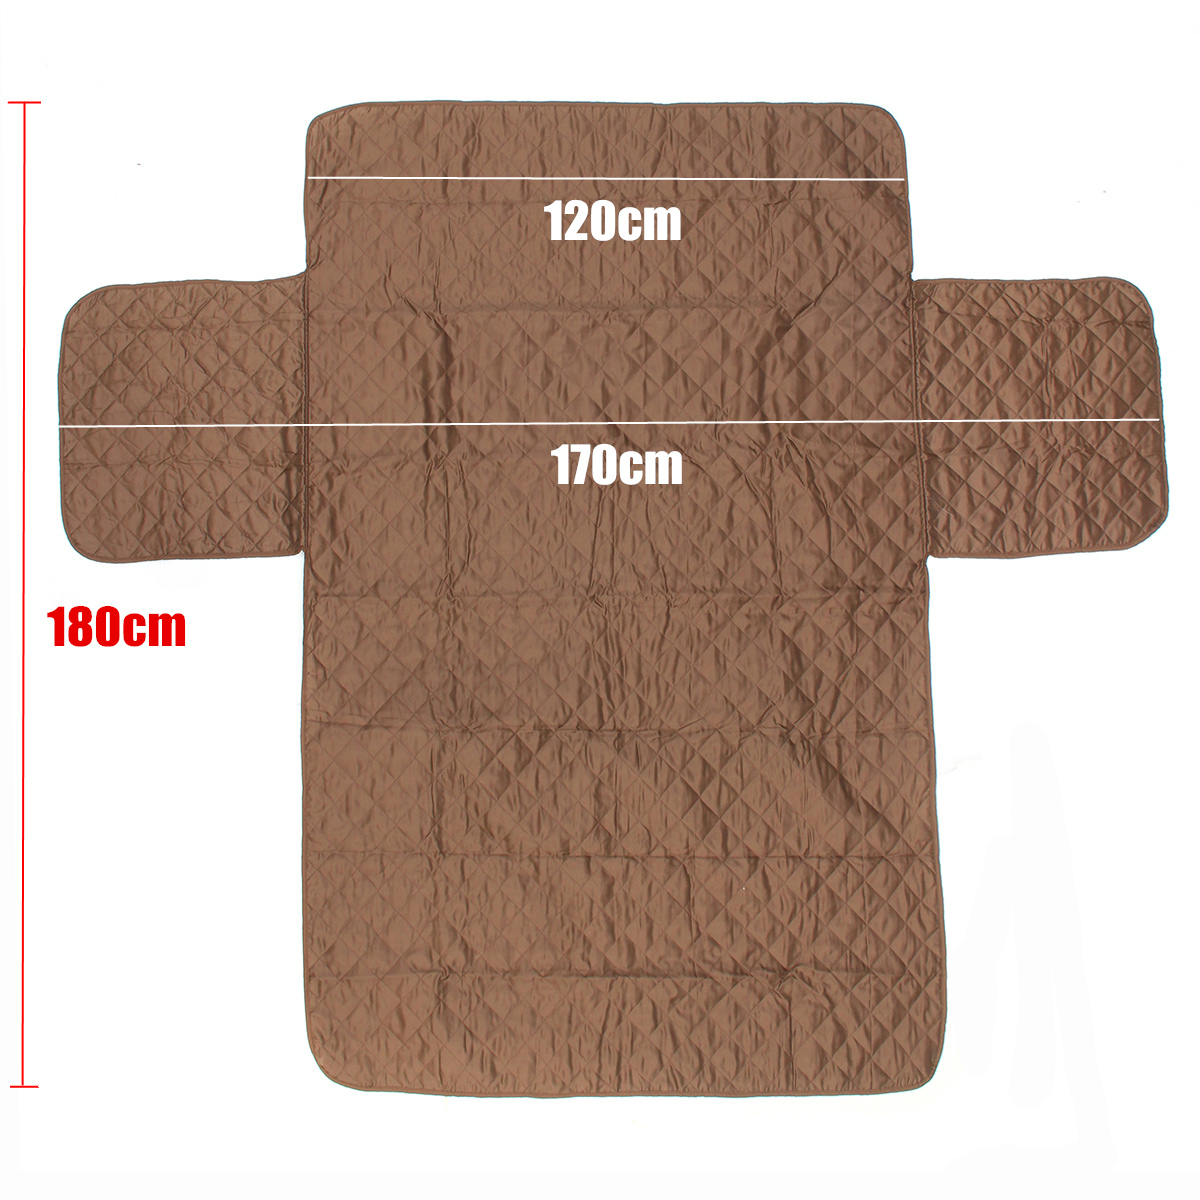 Pet-SofaCouch-Cover-For-Dog-Cat-Seat-Pad-Protector-Sheet-Furniture-Home-Soft-1215395